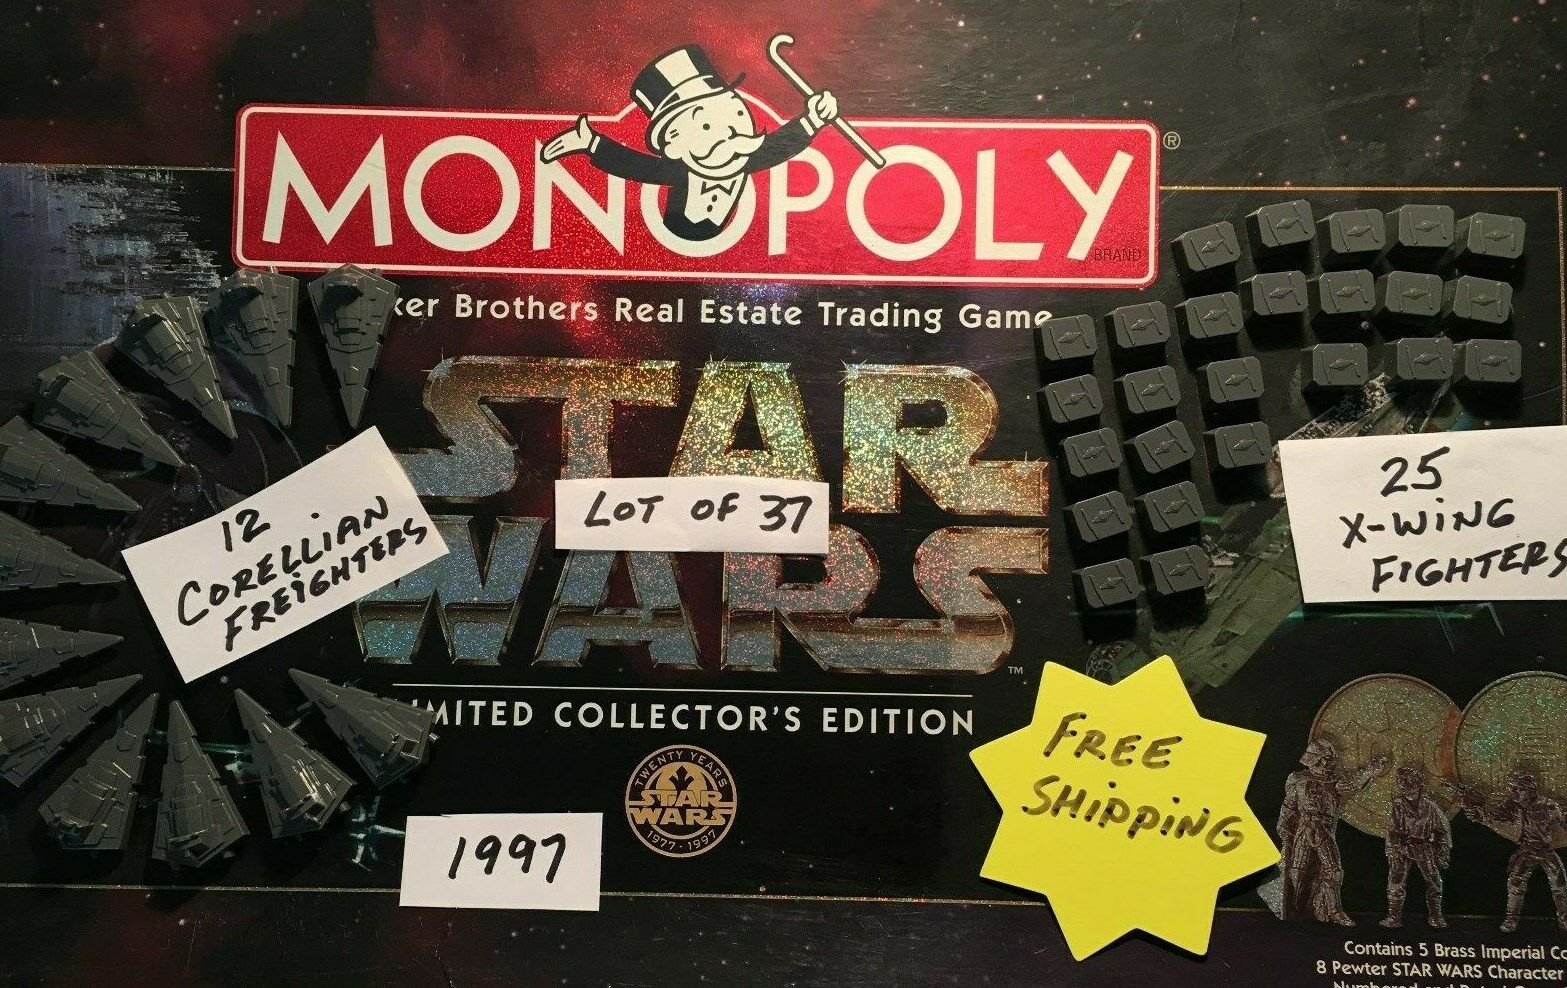 Star Wars Monopoly 1997 Corellian Freighters X-Wing Fighters lot of 37 Free Shi  Parker Brothers